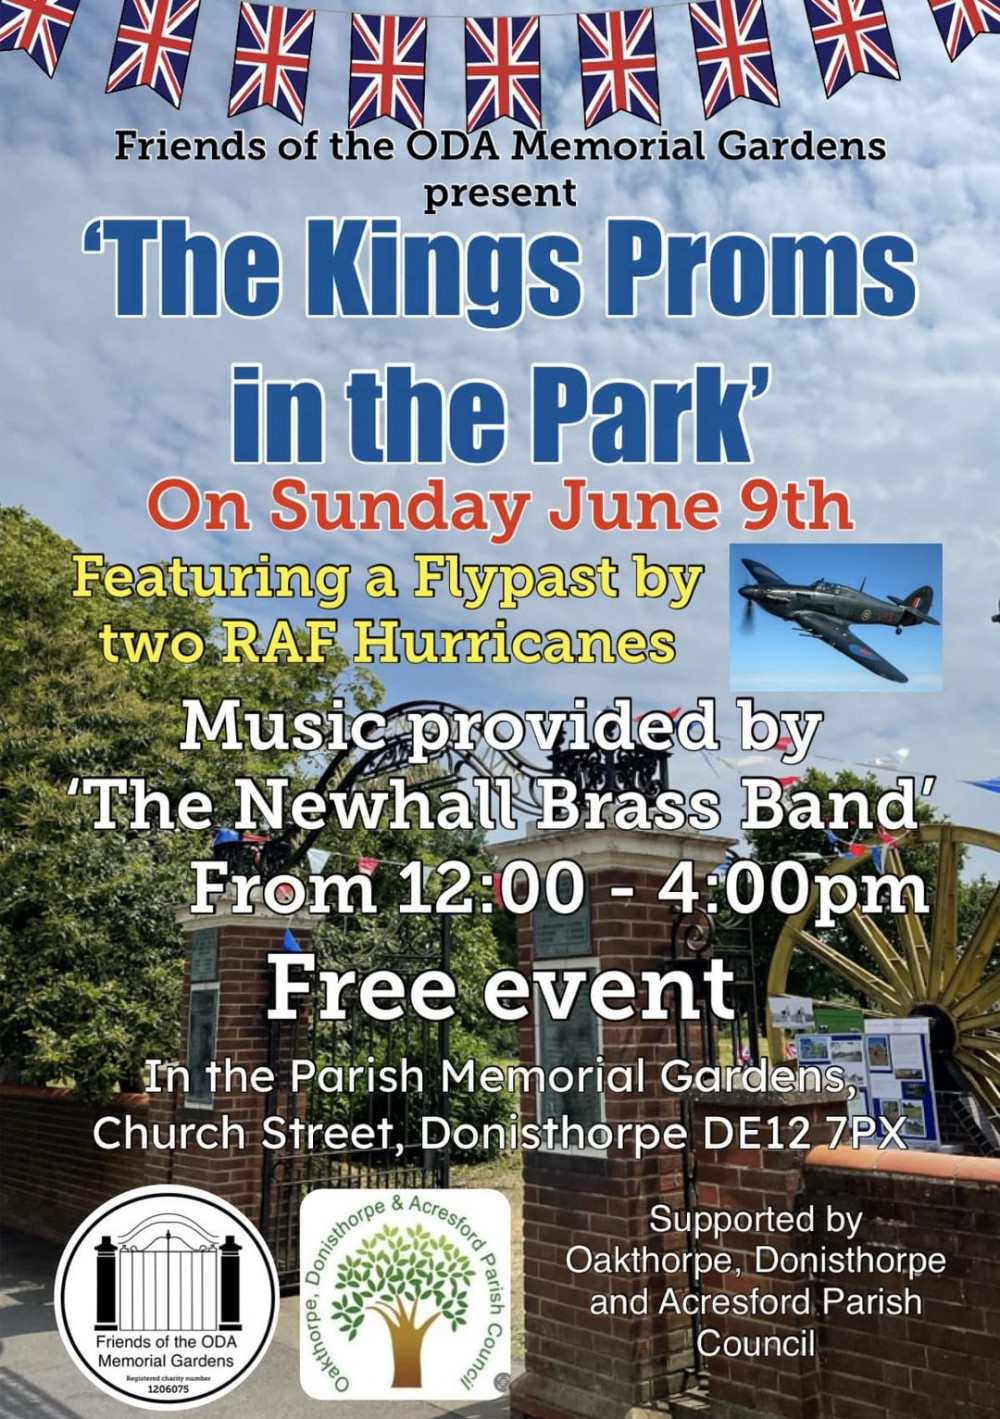 The King's Proms in the Park at the Parish Memorial Gardens, Donisthorpe, near Ashby de la Zouch